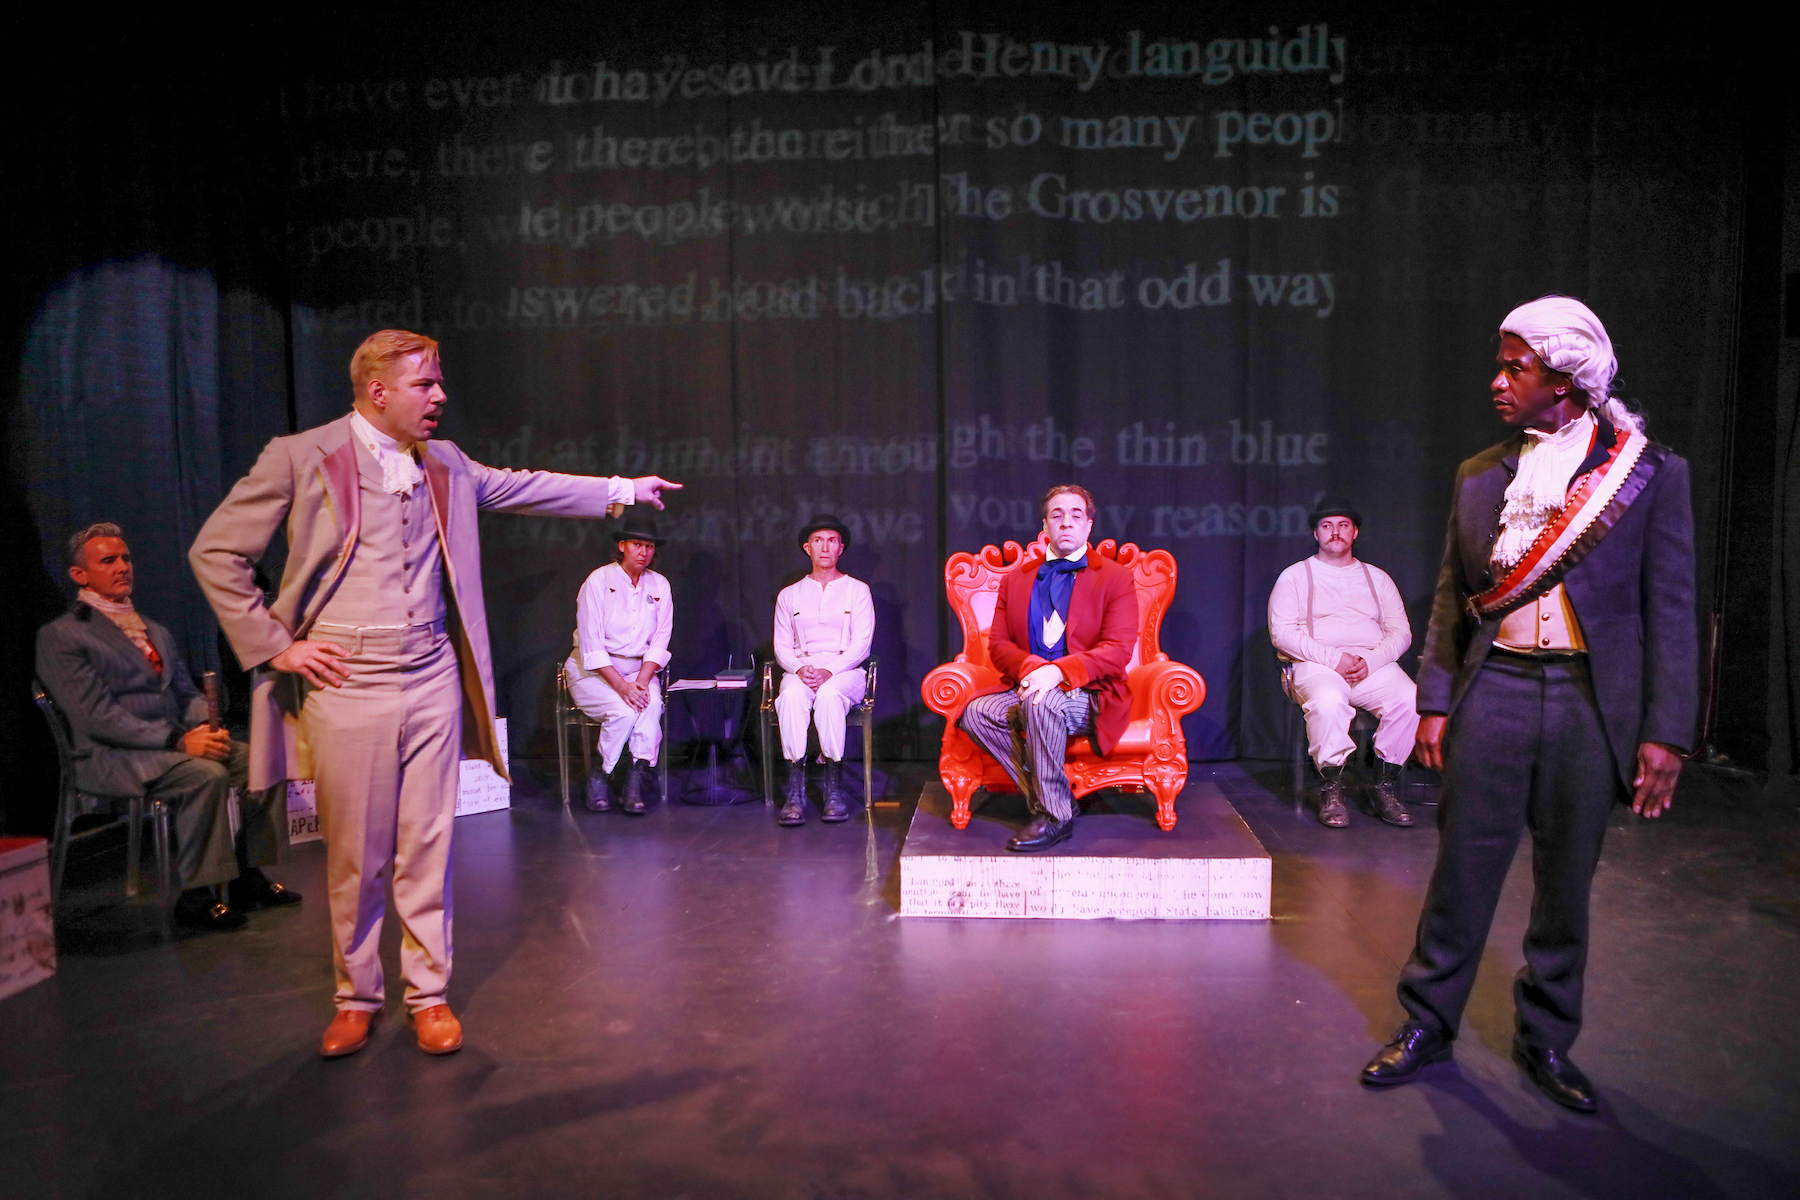 A white man points at a Black man while on stage performing "Gross Indecency" in Palm Springs